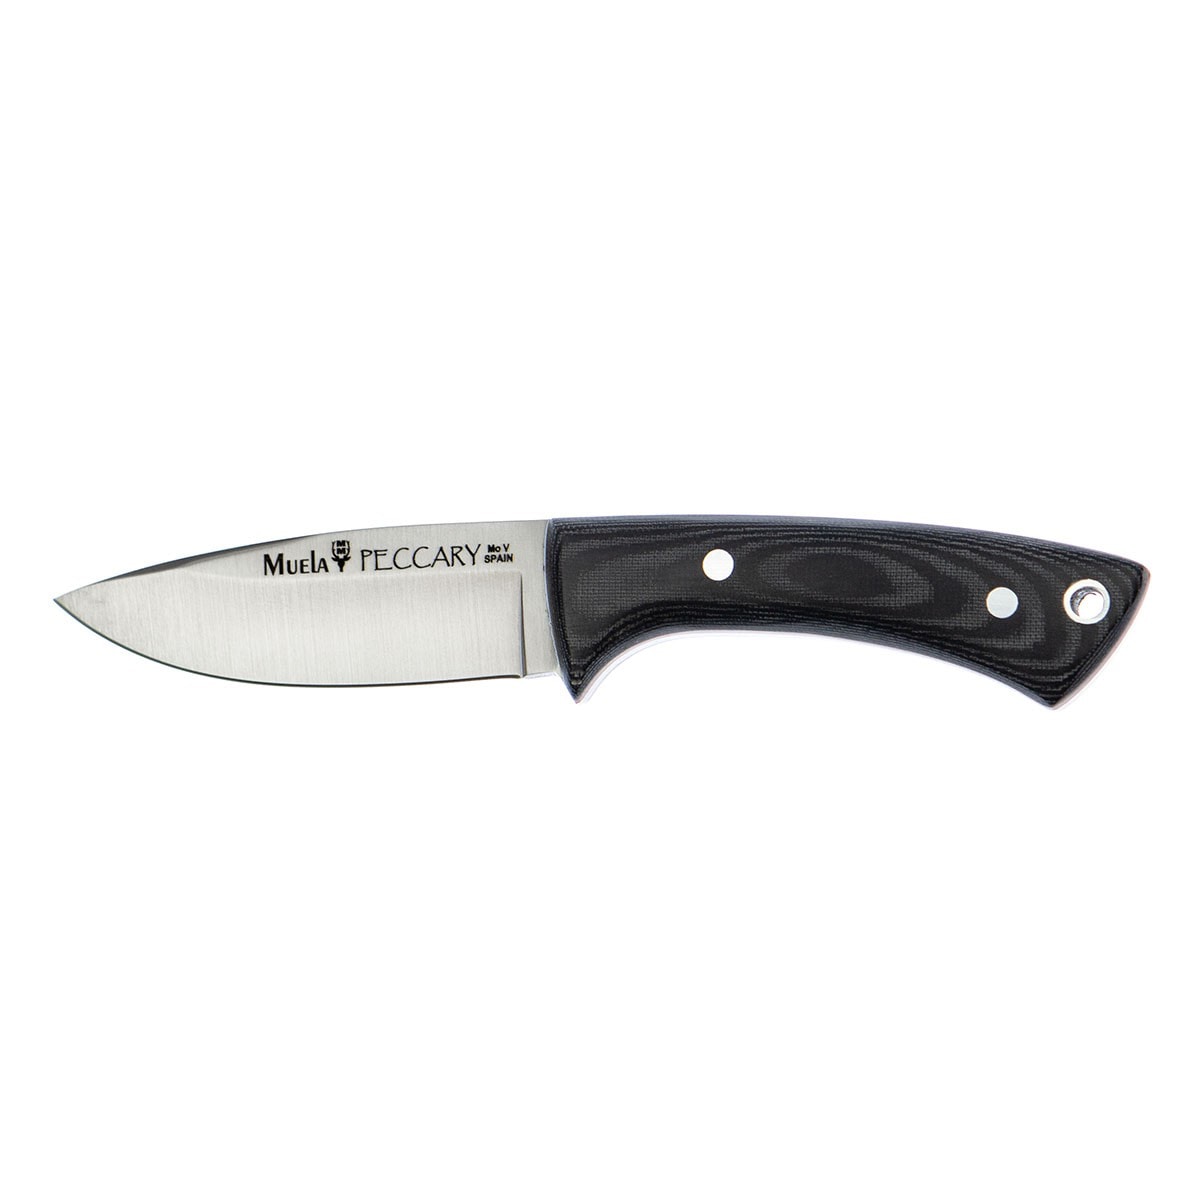 Hunting knife PECCARY-8M